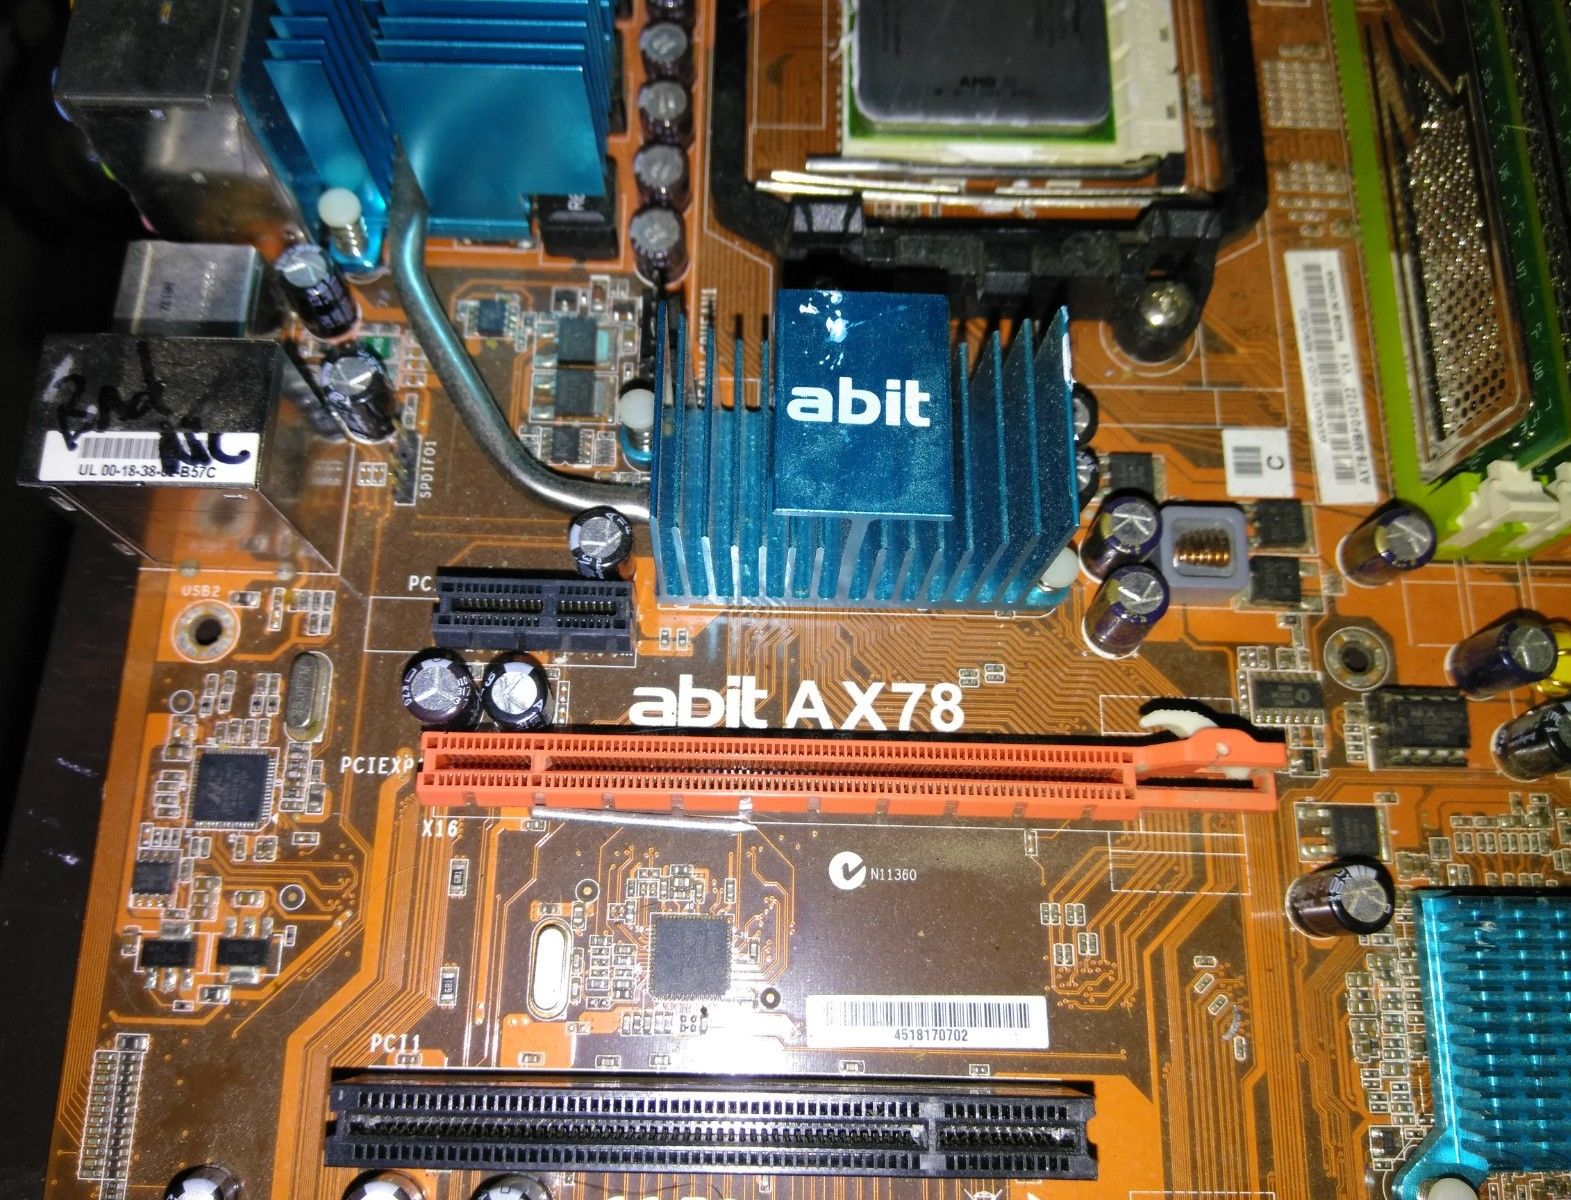 For sale ecs kn1 Extreme abit ax78 3 cpu's HD3870 ATi video card and lots of ddr memory